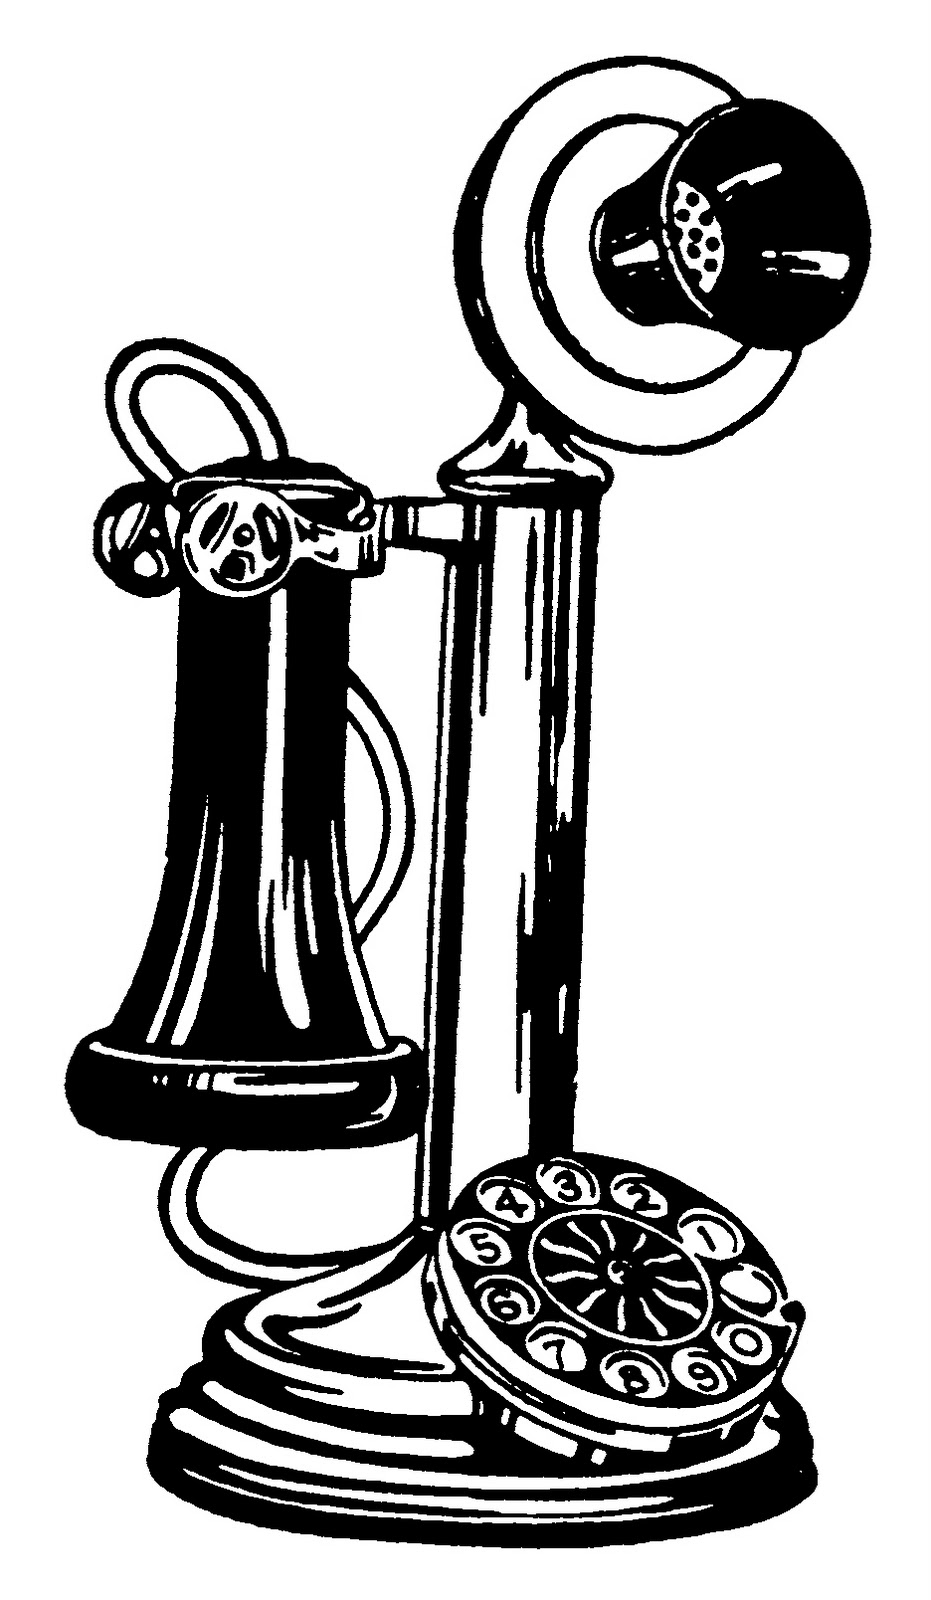 old phone clipart - photo #1